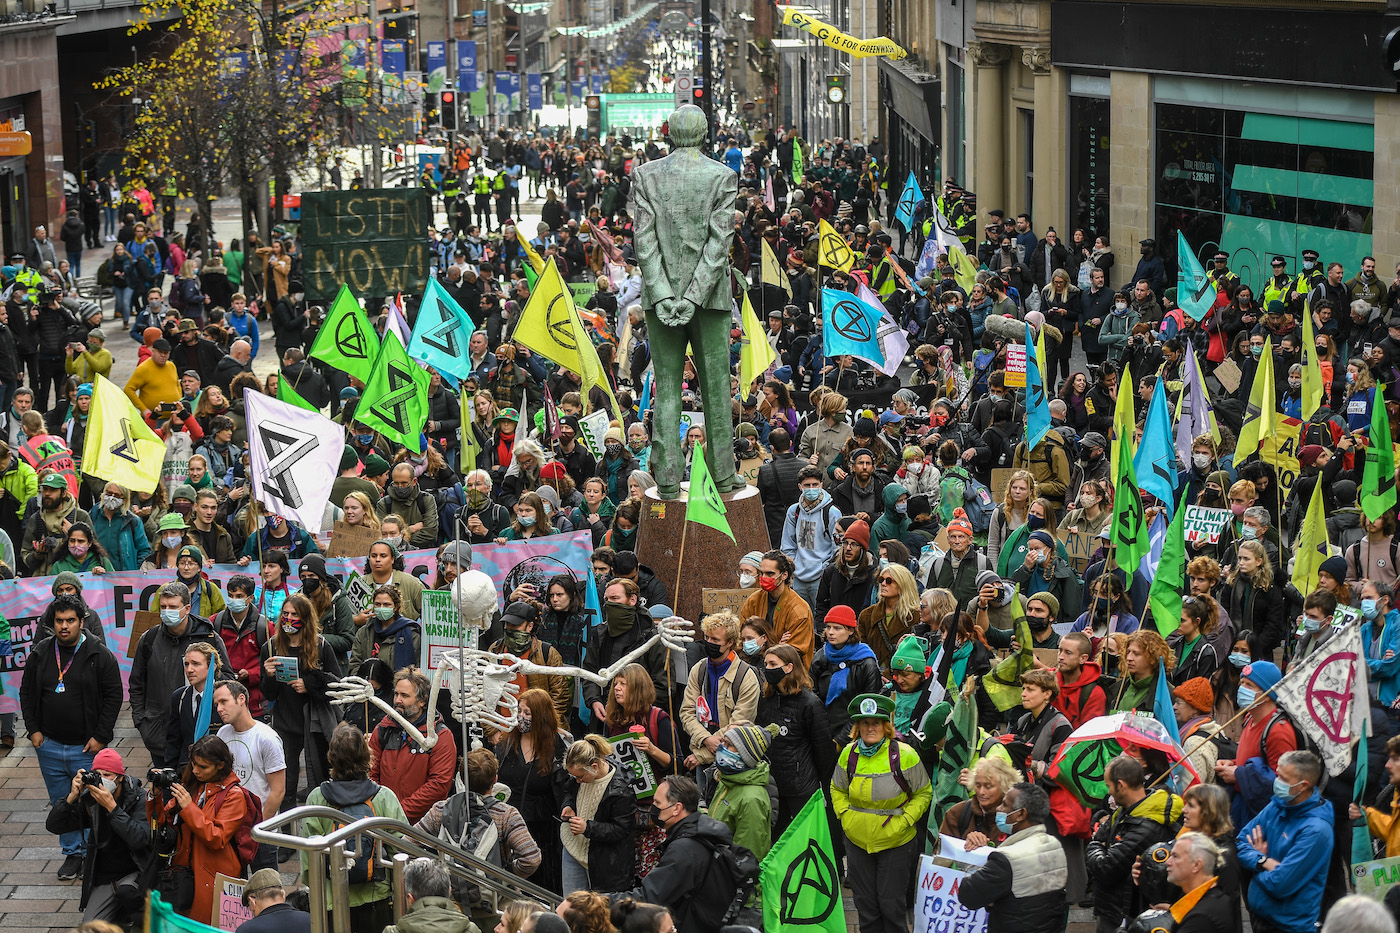 A large mass of protesters in the streets of Glasgow with extinction rebellion flags